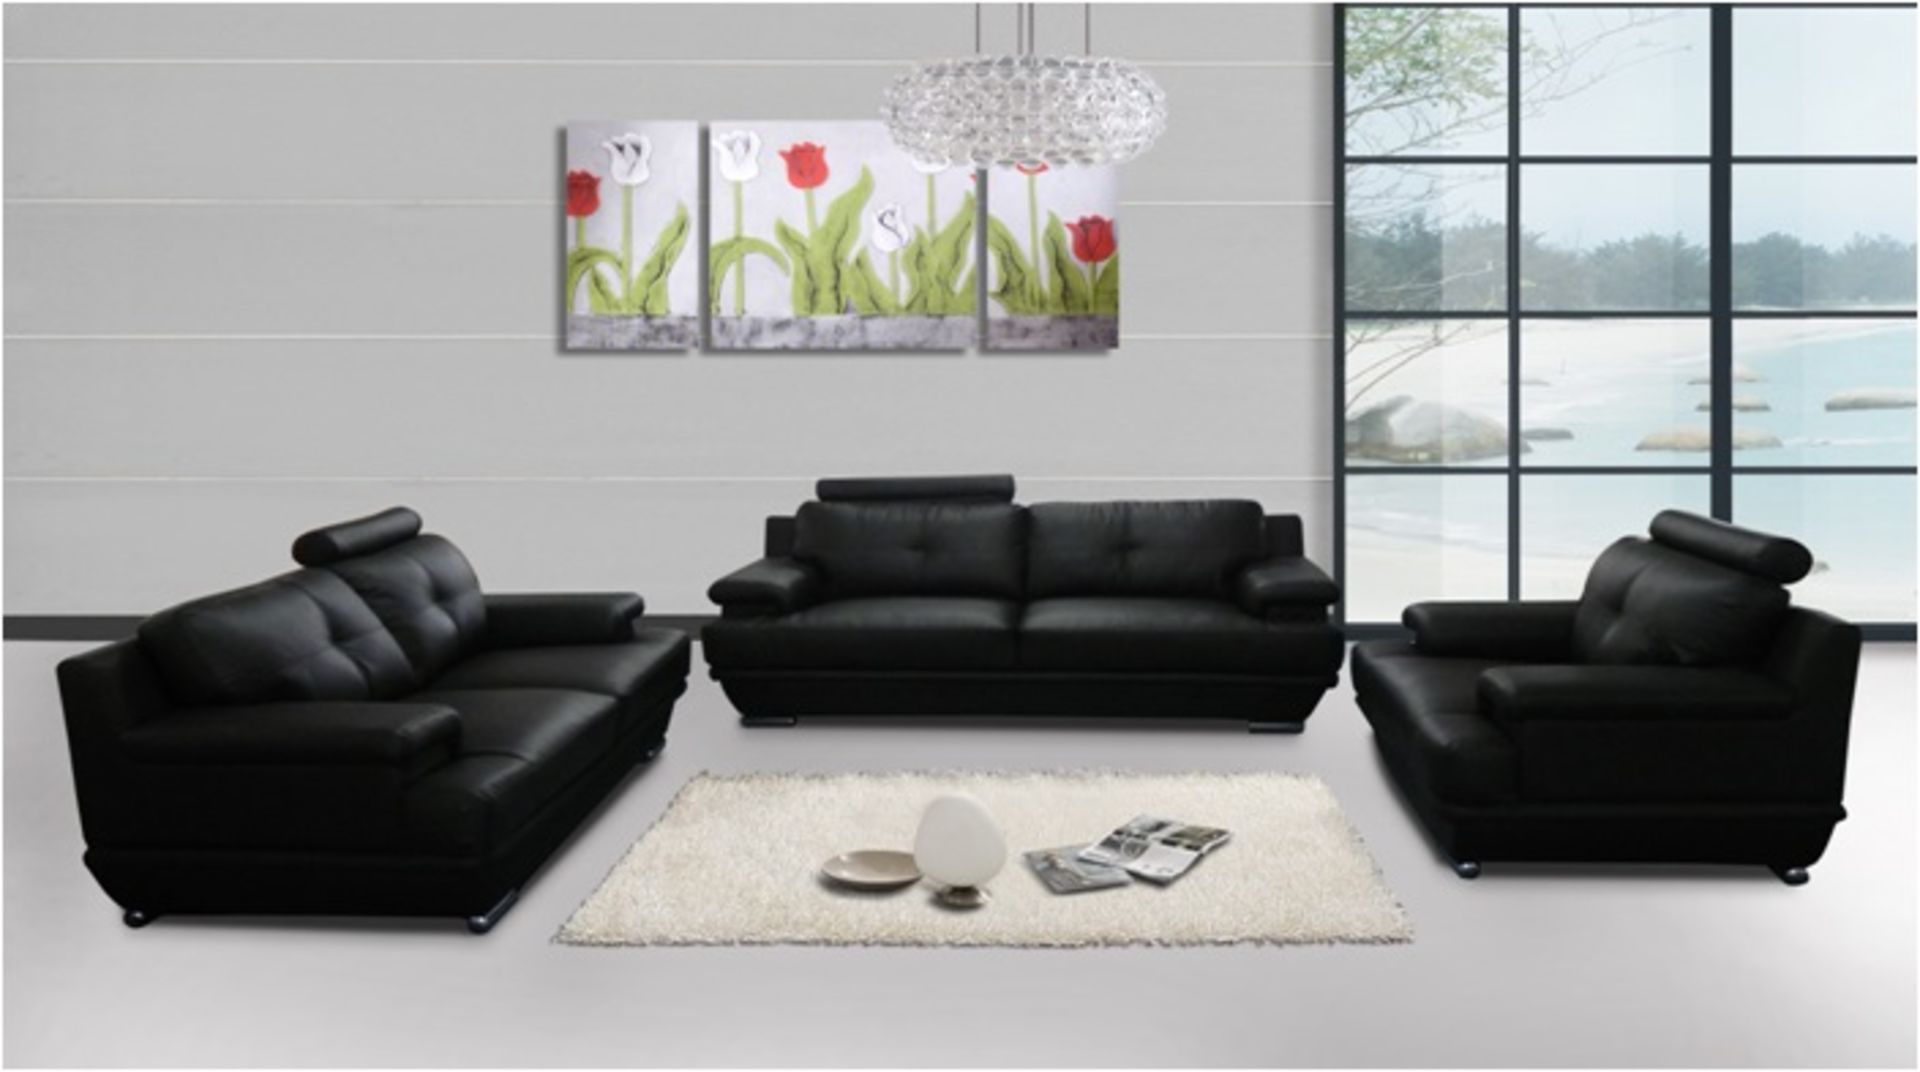 1 x Black Faux Leather Sofa - 1 Seater (Brand New & Boxed - Ref SFS006)